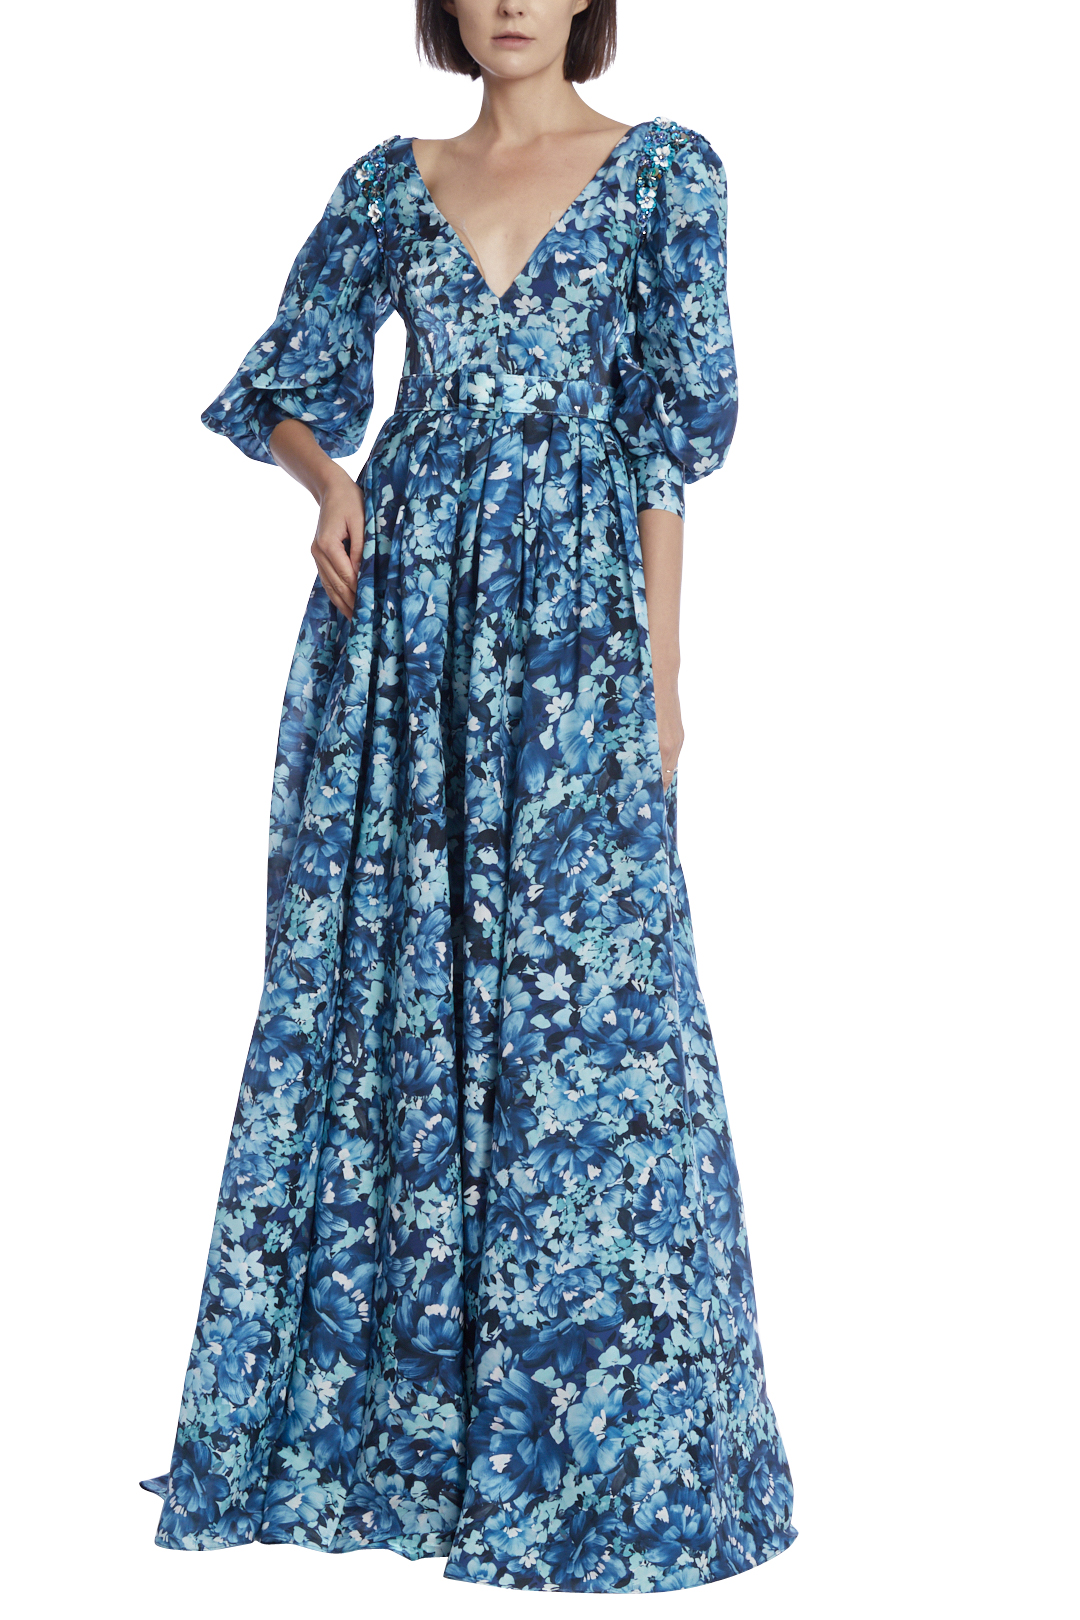 Indian Gown - Shop Foil Printed Floral Gowns Online | Me99